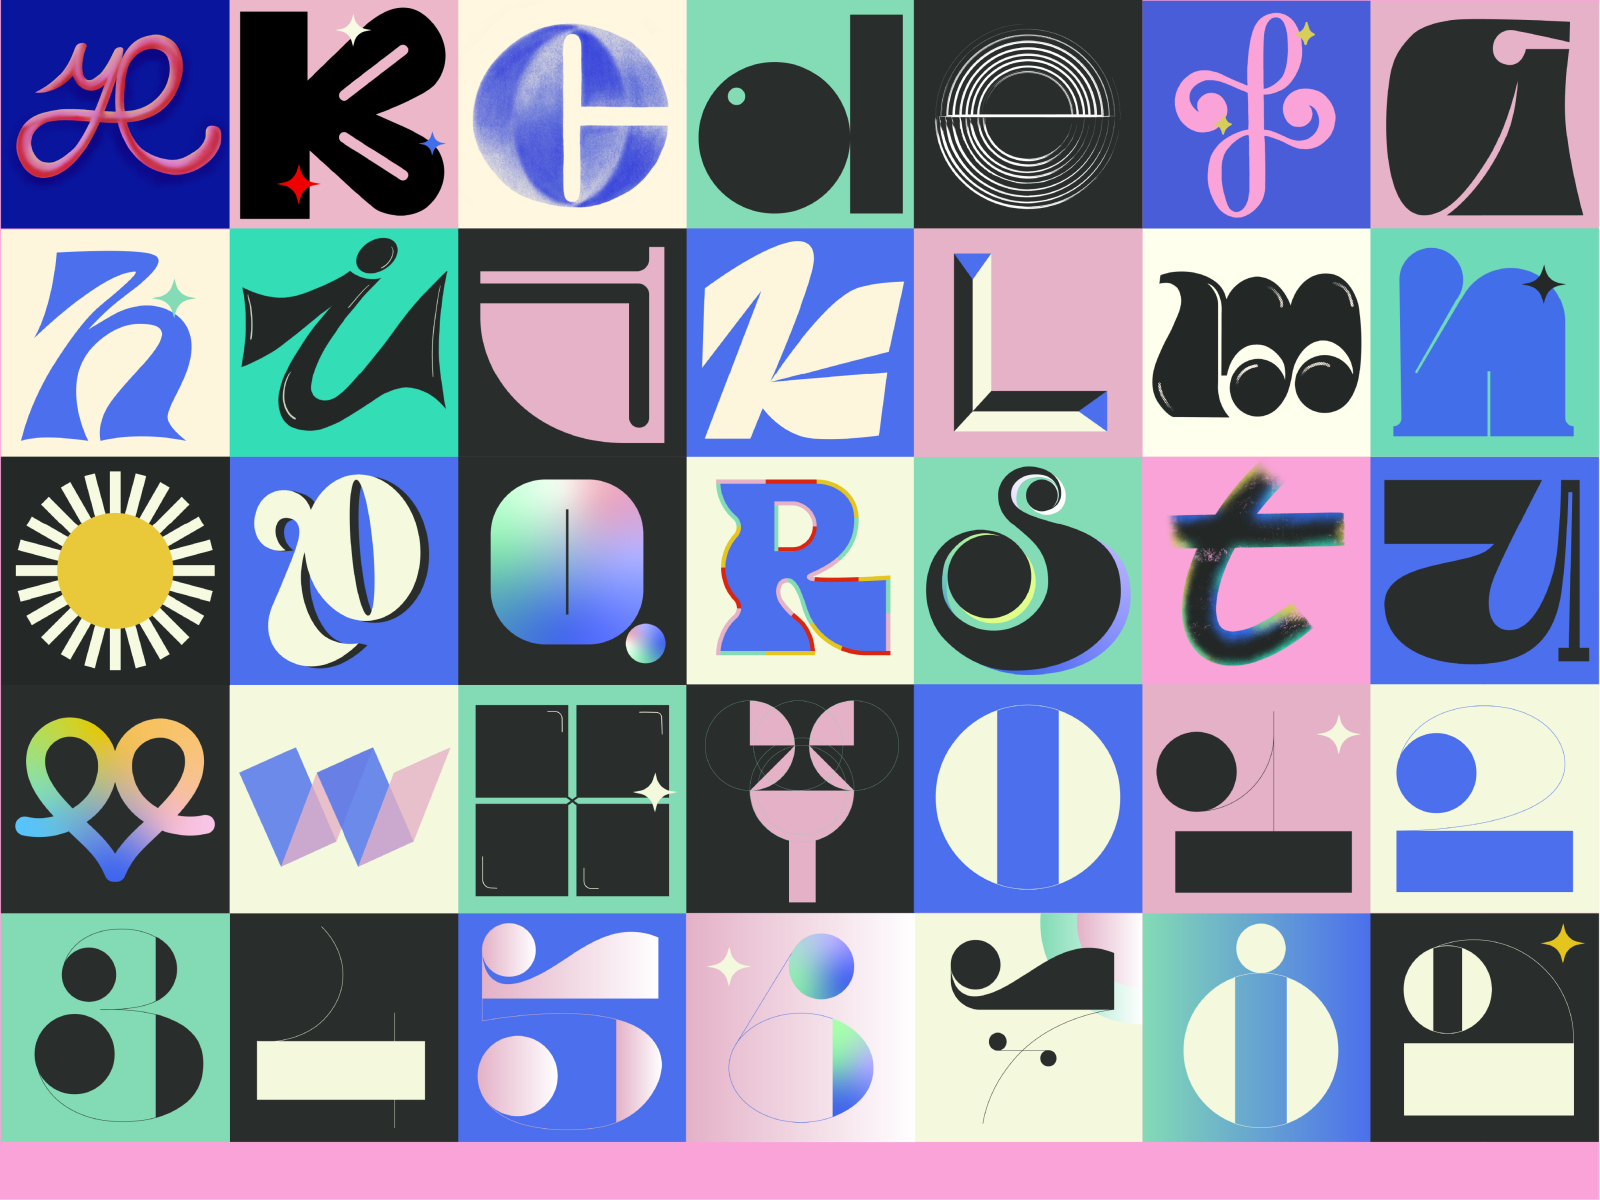 36 days of type 2022 by Margherita Perugini on Dribbble